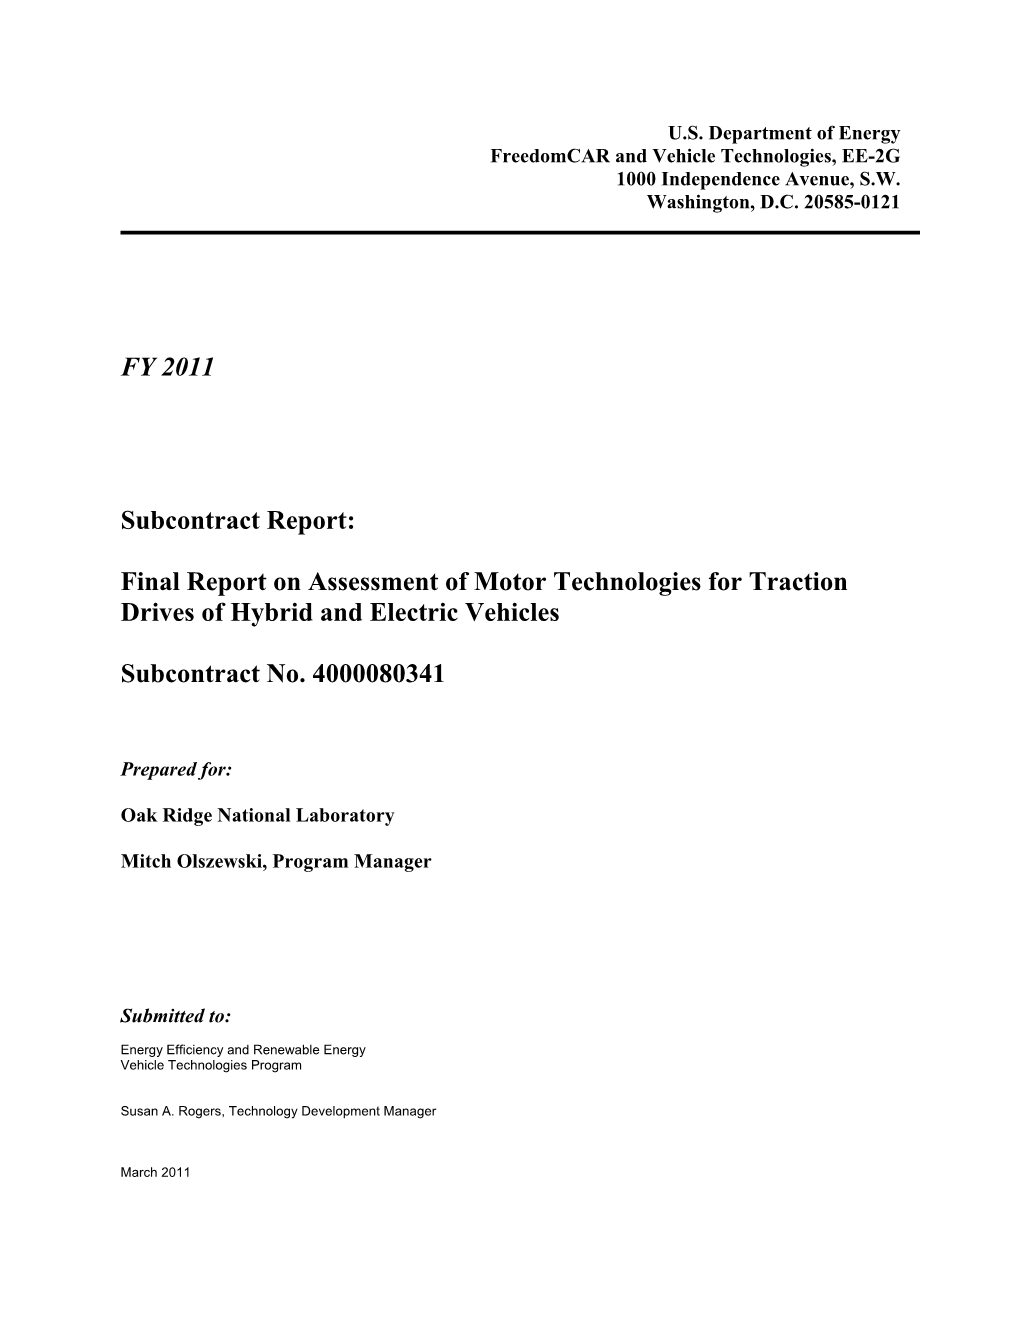 Final Report on Assessment of Motor Technologies for Traction Drives of Hybrid and Electric Vehicles